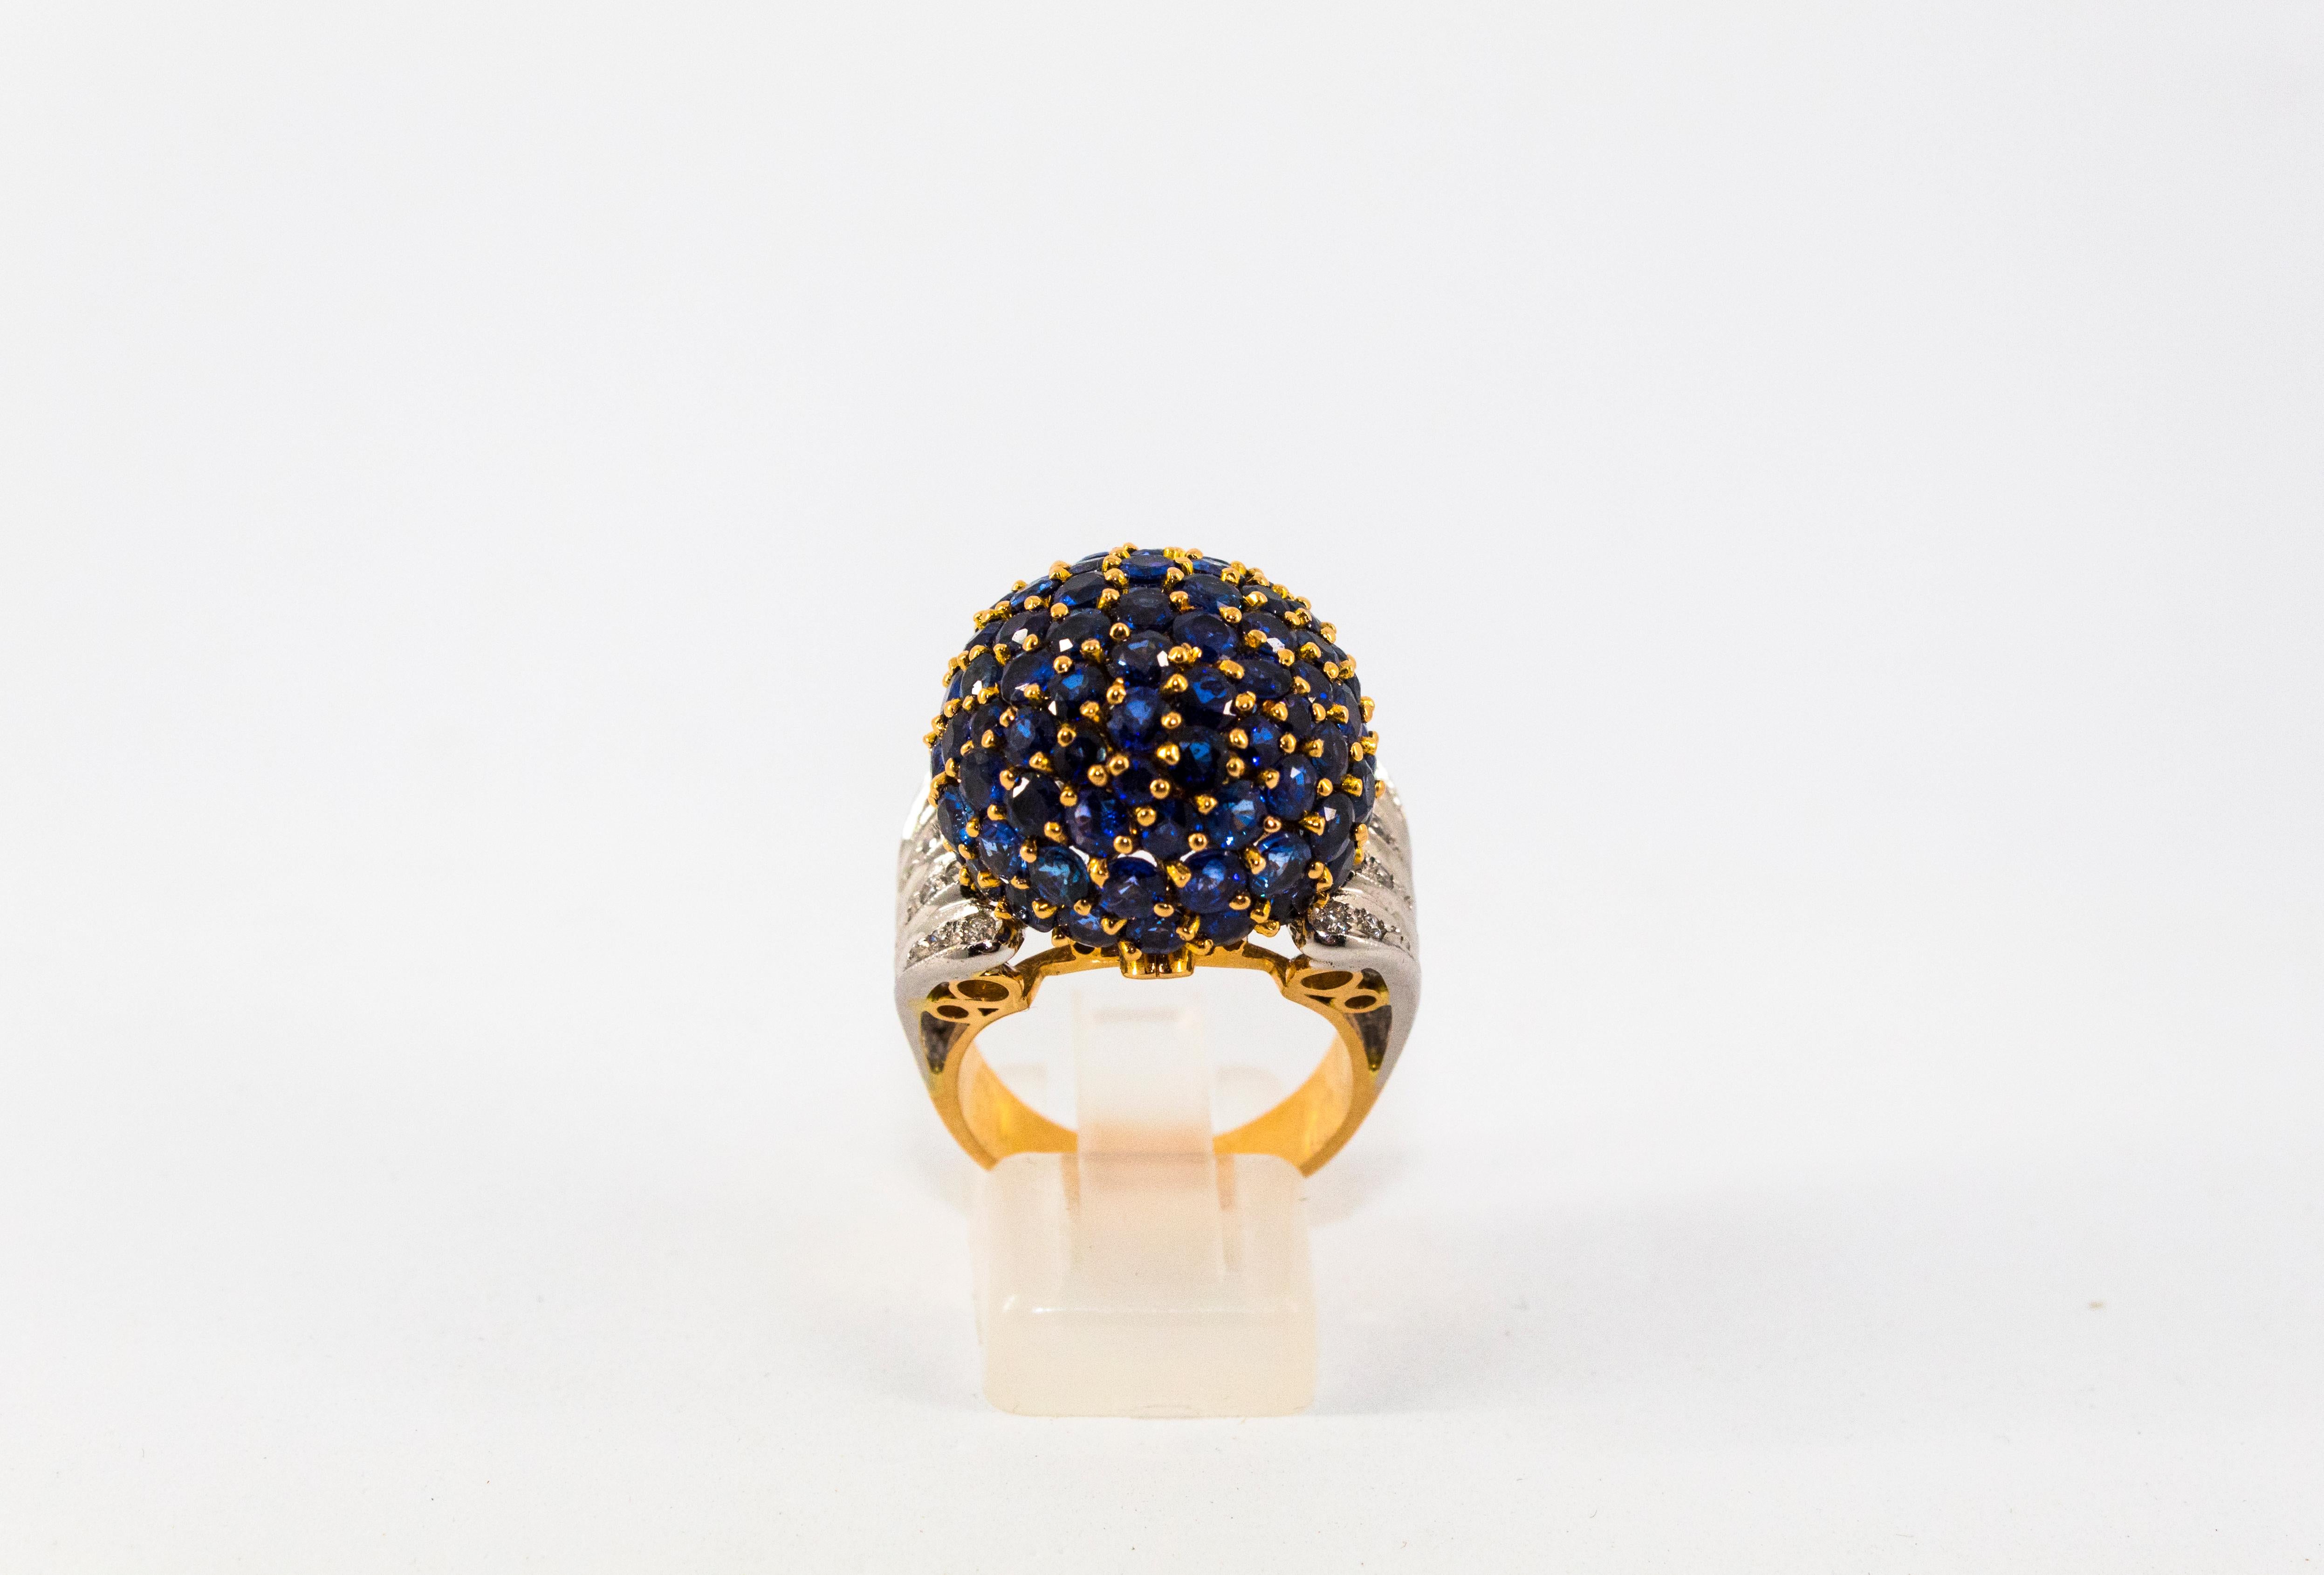 This Ring is made of 14K Yellow Gold.
This Ring has 0.50 Carats of White Diamonds.
This Ring has 12.00 Carats of Blue Sapphires.
Size ITA: 15 USA: 7 1/4
We're a workshop so every piece is handmade, customizable and resizable.